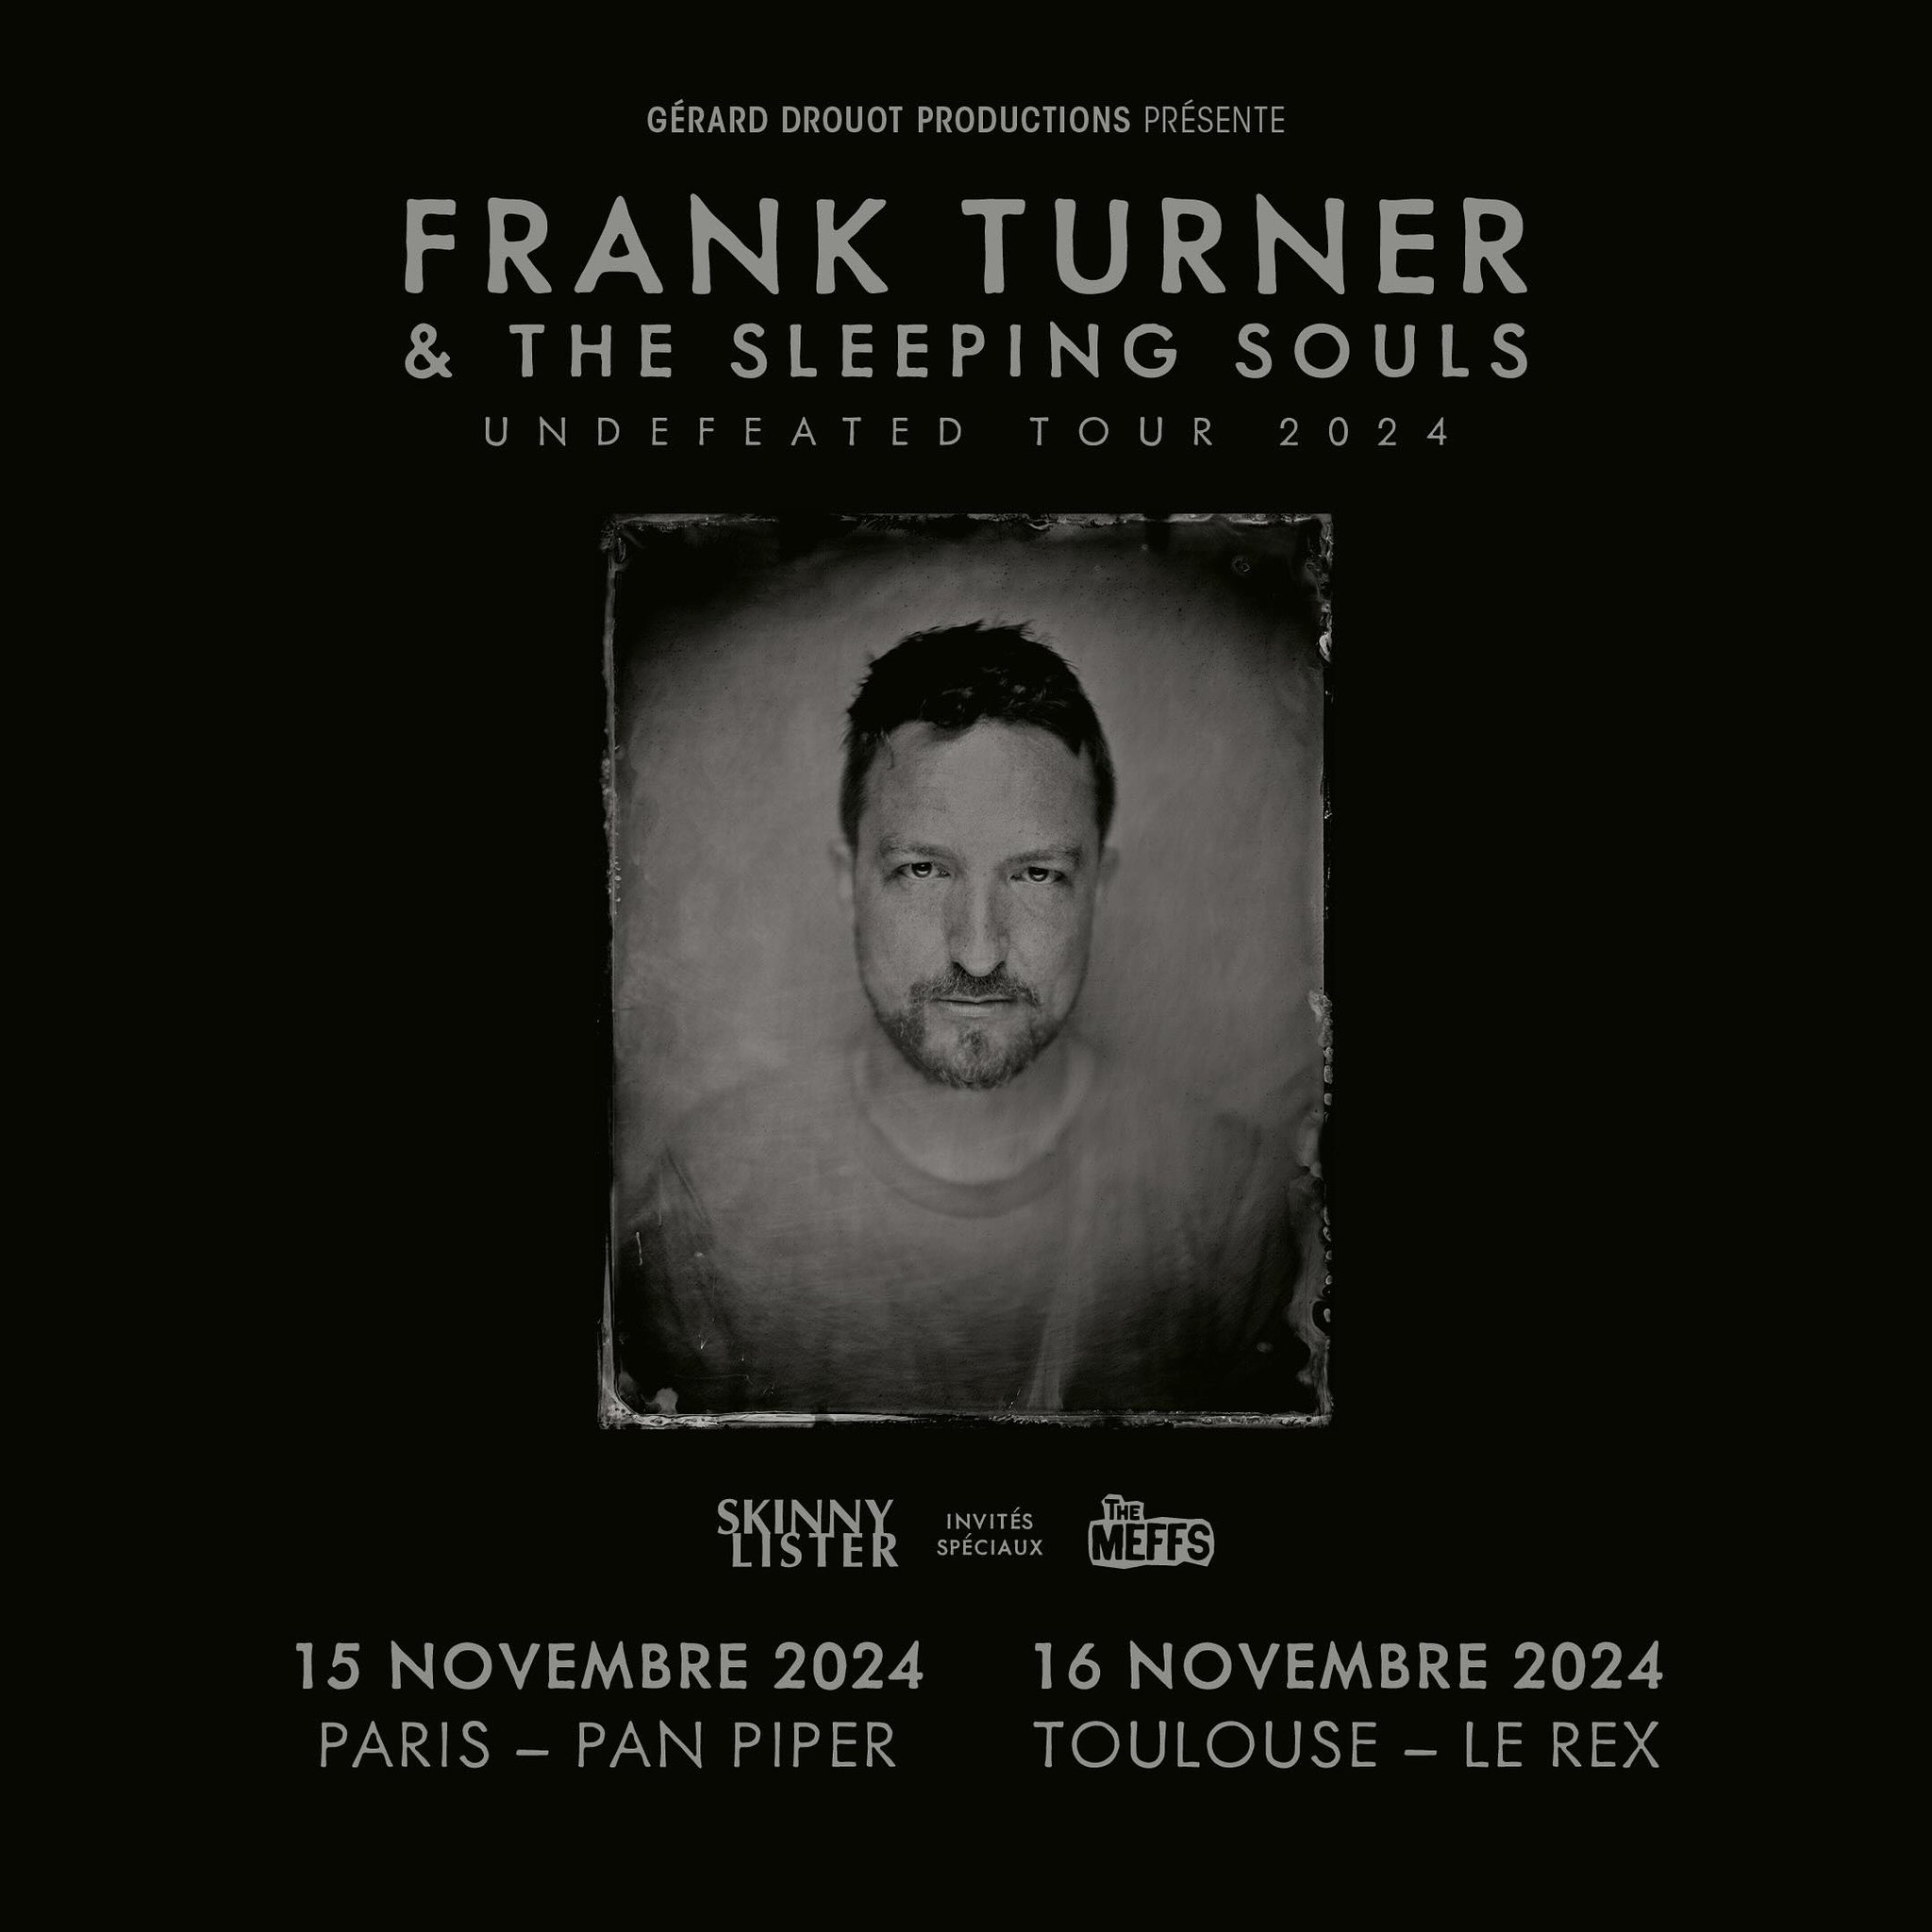 Frank Turner and The Sleeping Souls at Le Rex de Toulouse Tickets